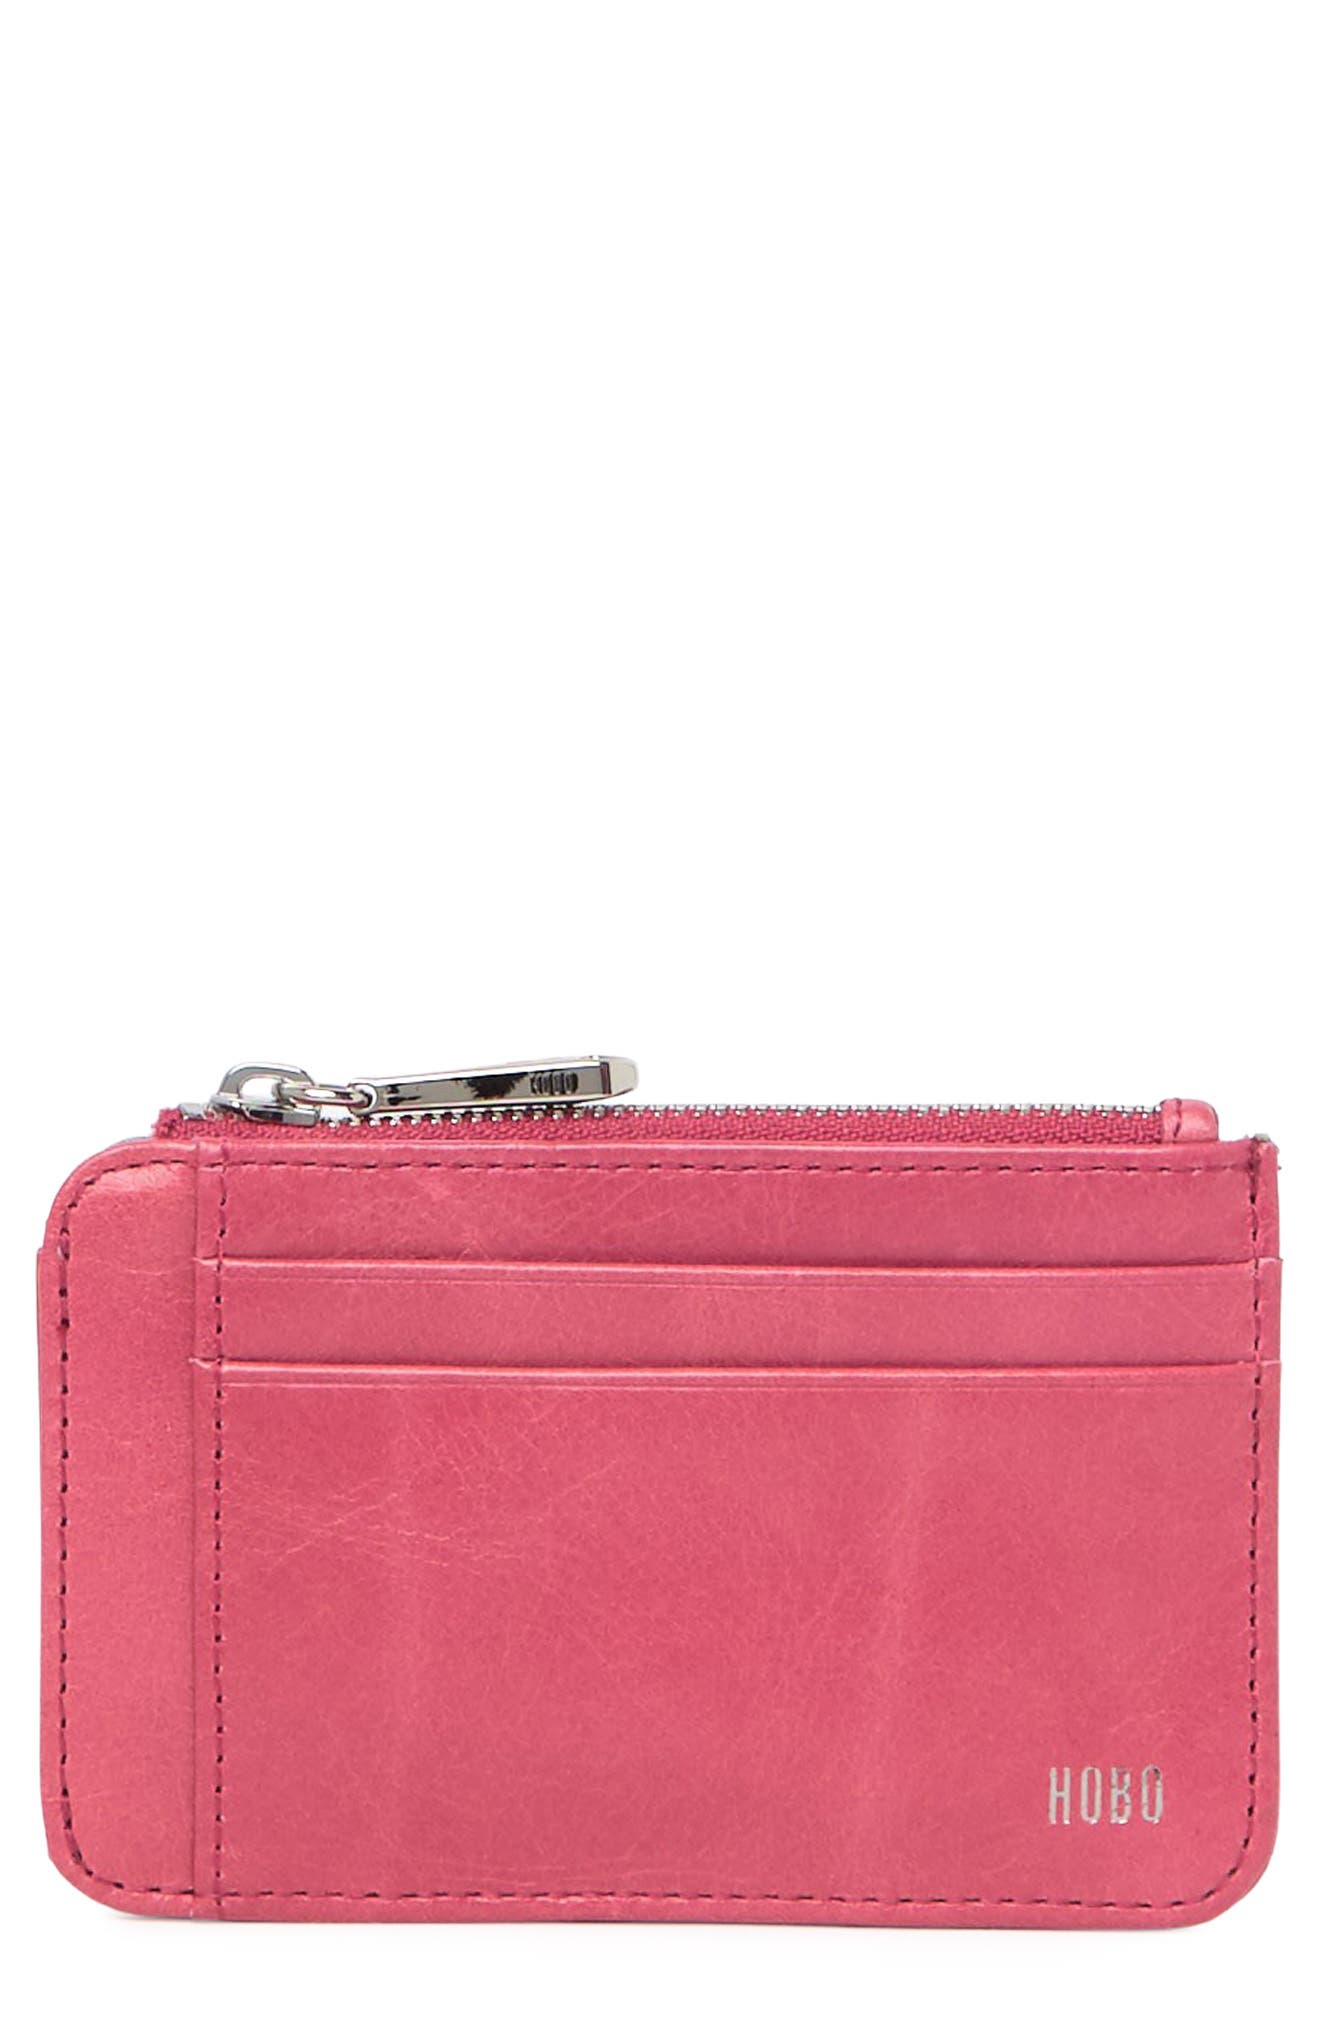 Hobo Kai Vintage Leather Card Case In Blossom